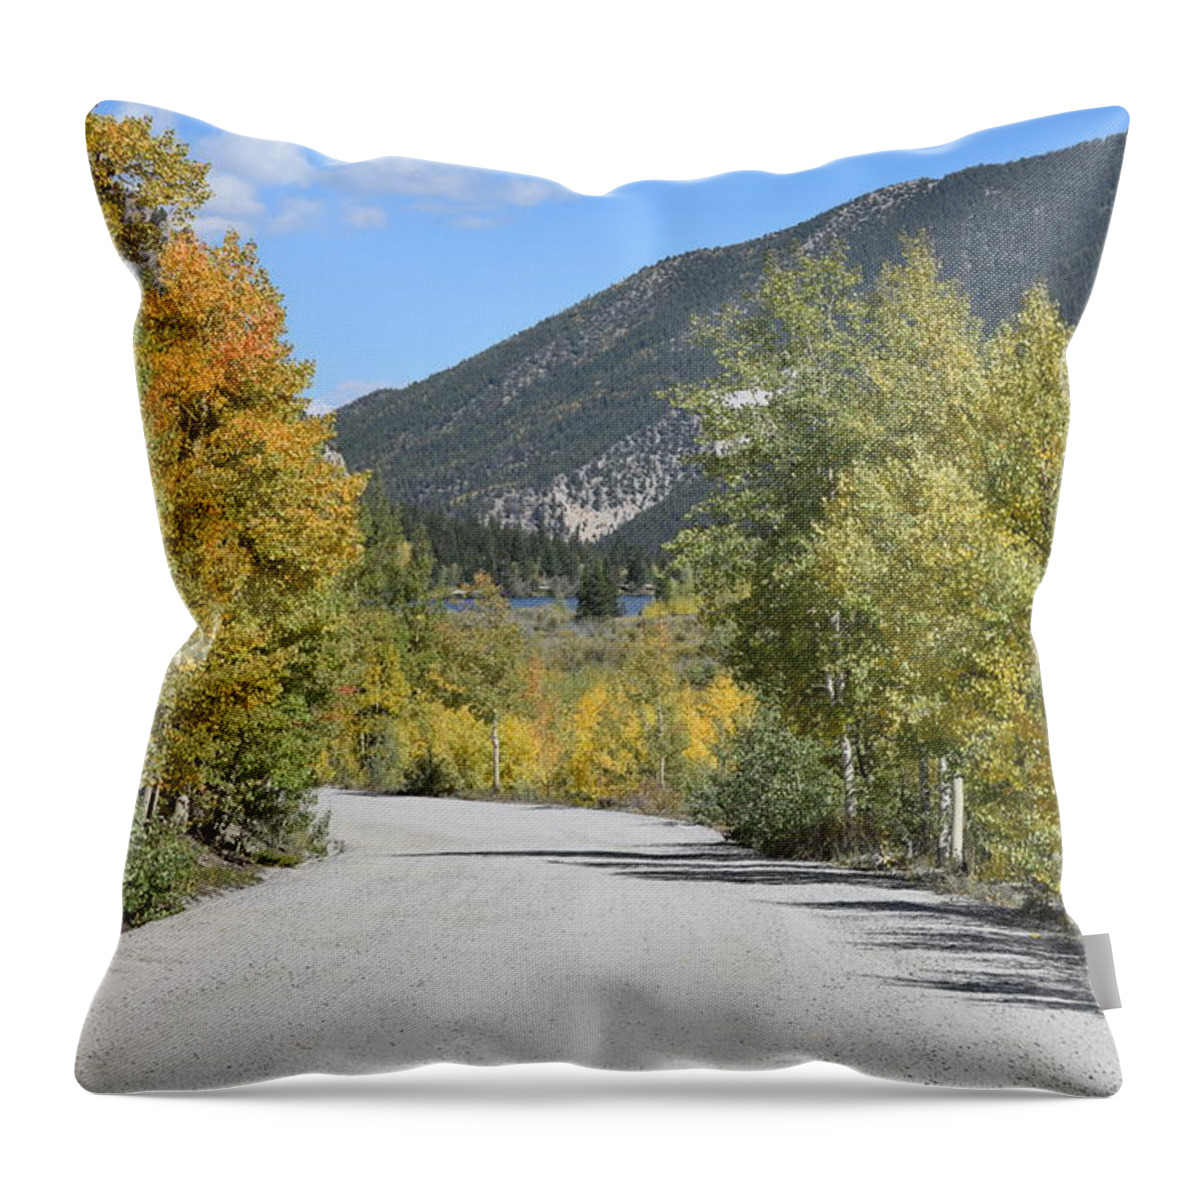 Aspen_line_road Throw Pillow featuring the photograph Aspen Lined Road by Margarethe Binkley